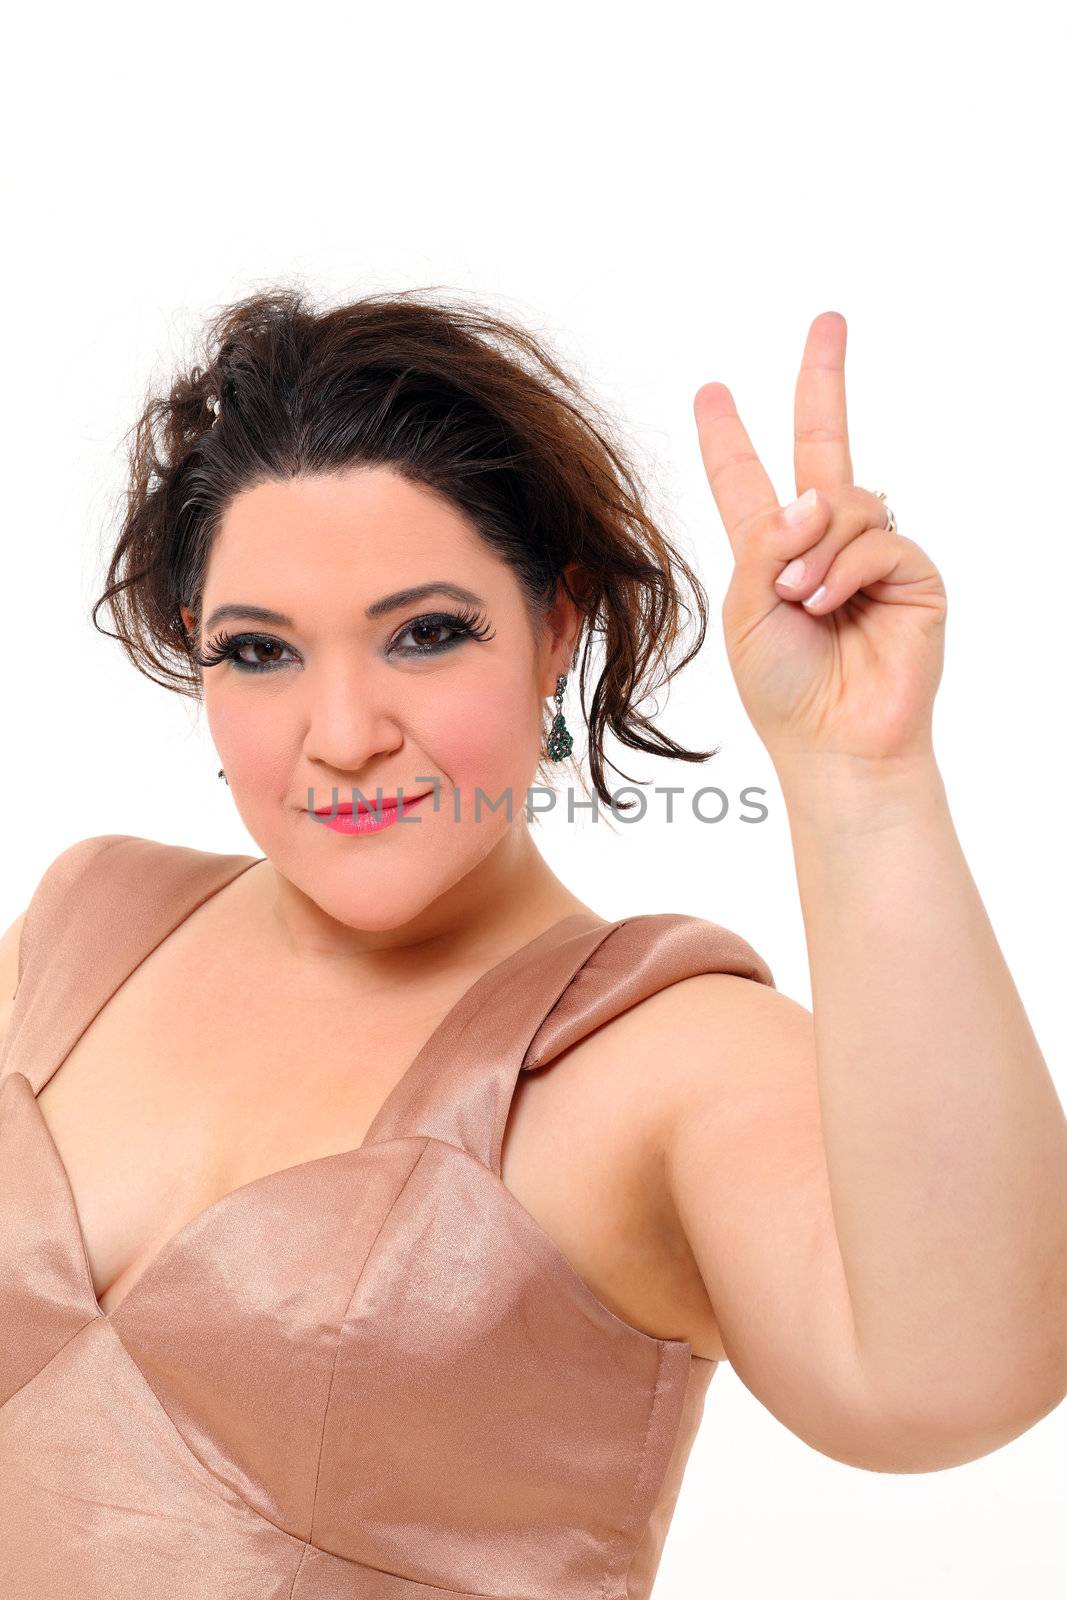 Elegant plus size woman doing victory sign by shamtor